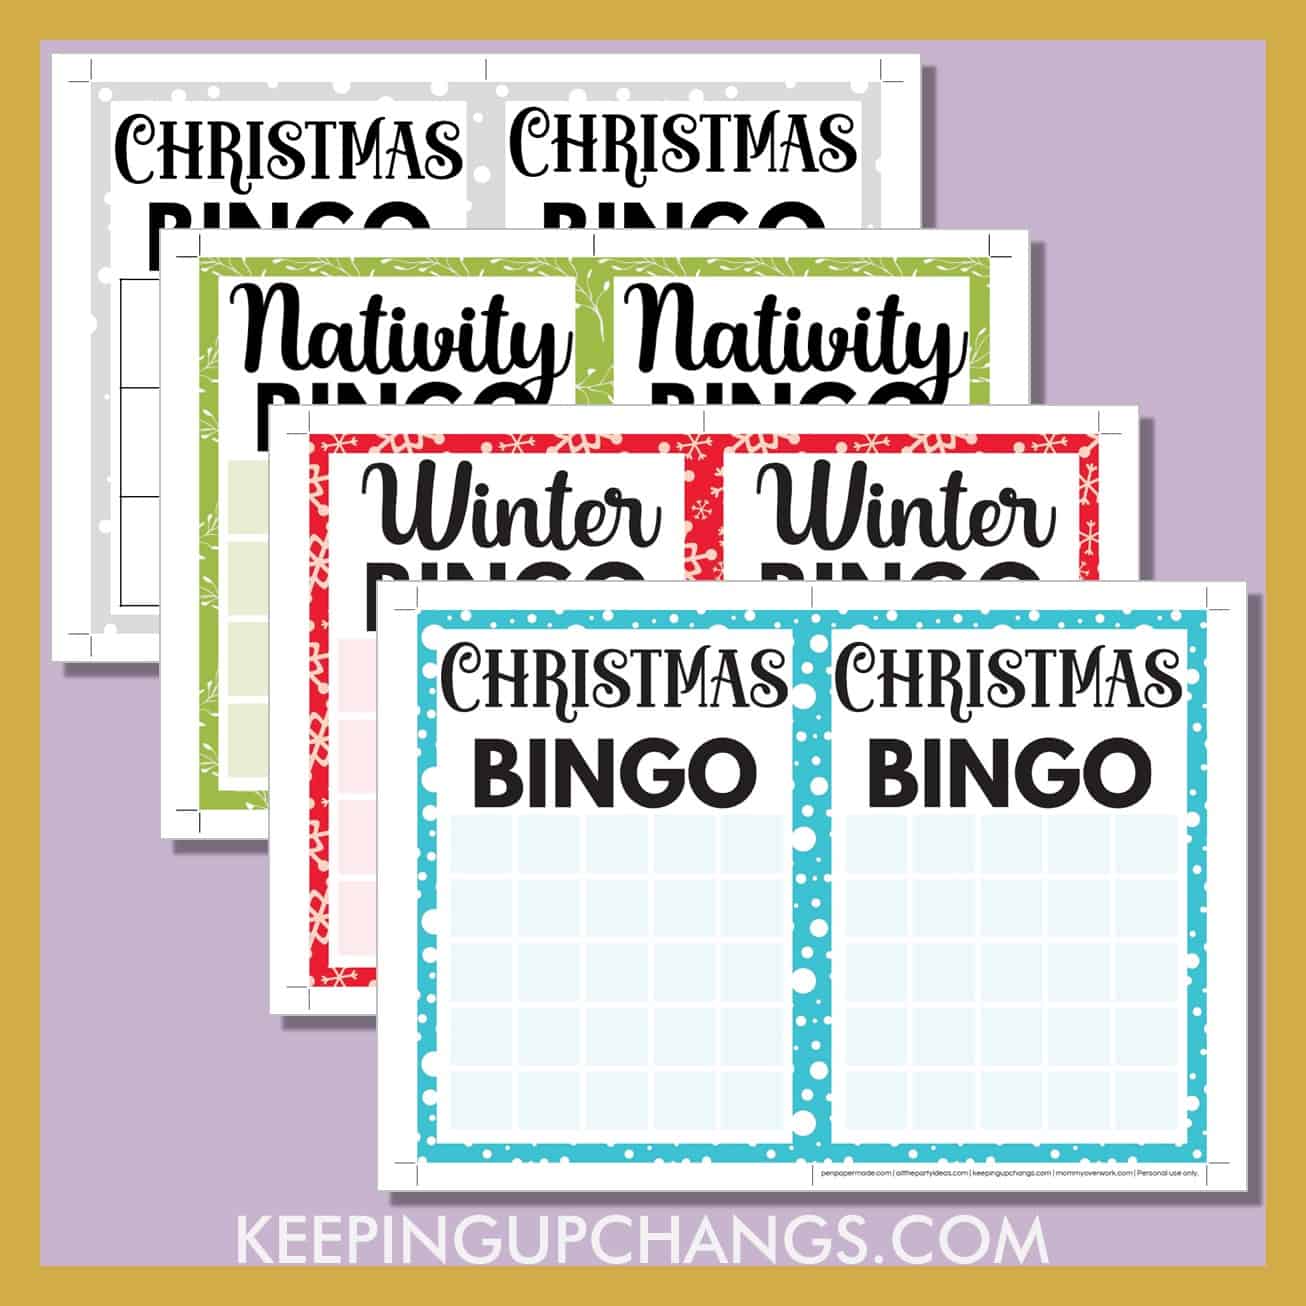 free blank christmas bingo card printable templates in 3x3, 4x4 and 5x5 grids.